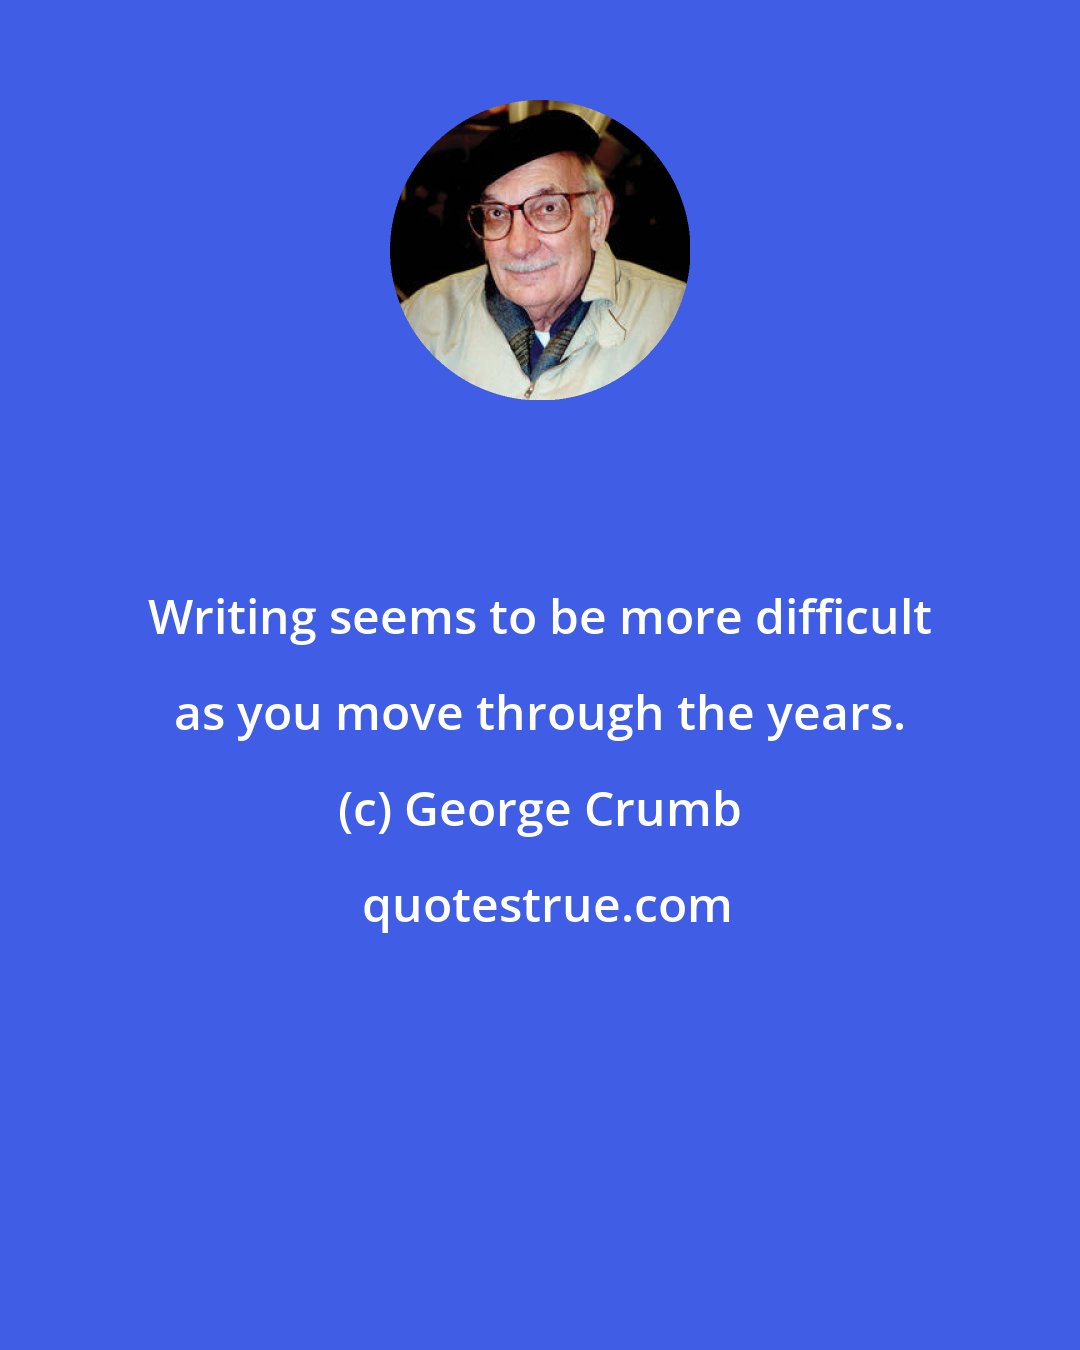 George Crumb: Writing seems to be more difficult as you move through the years.